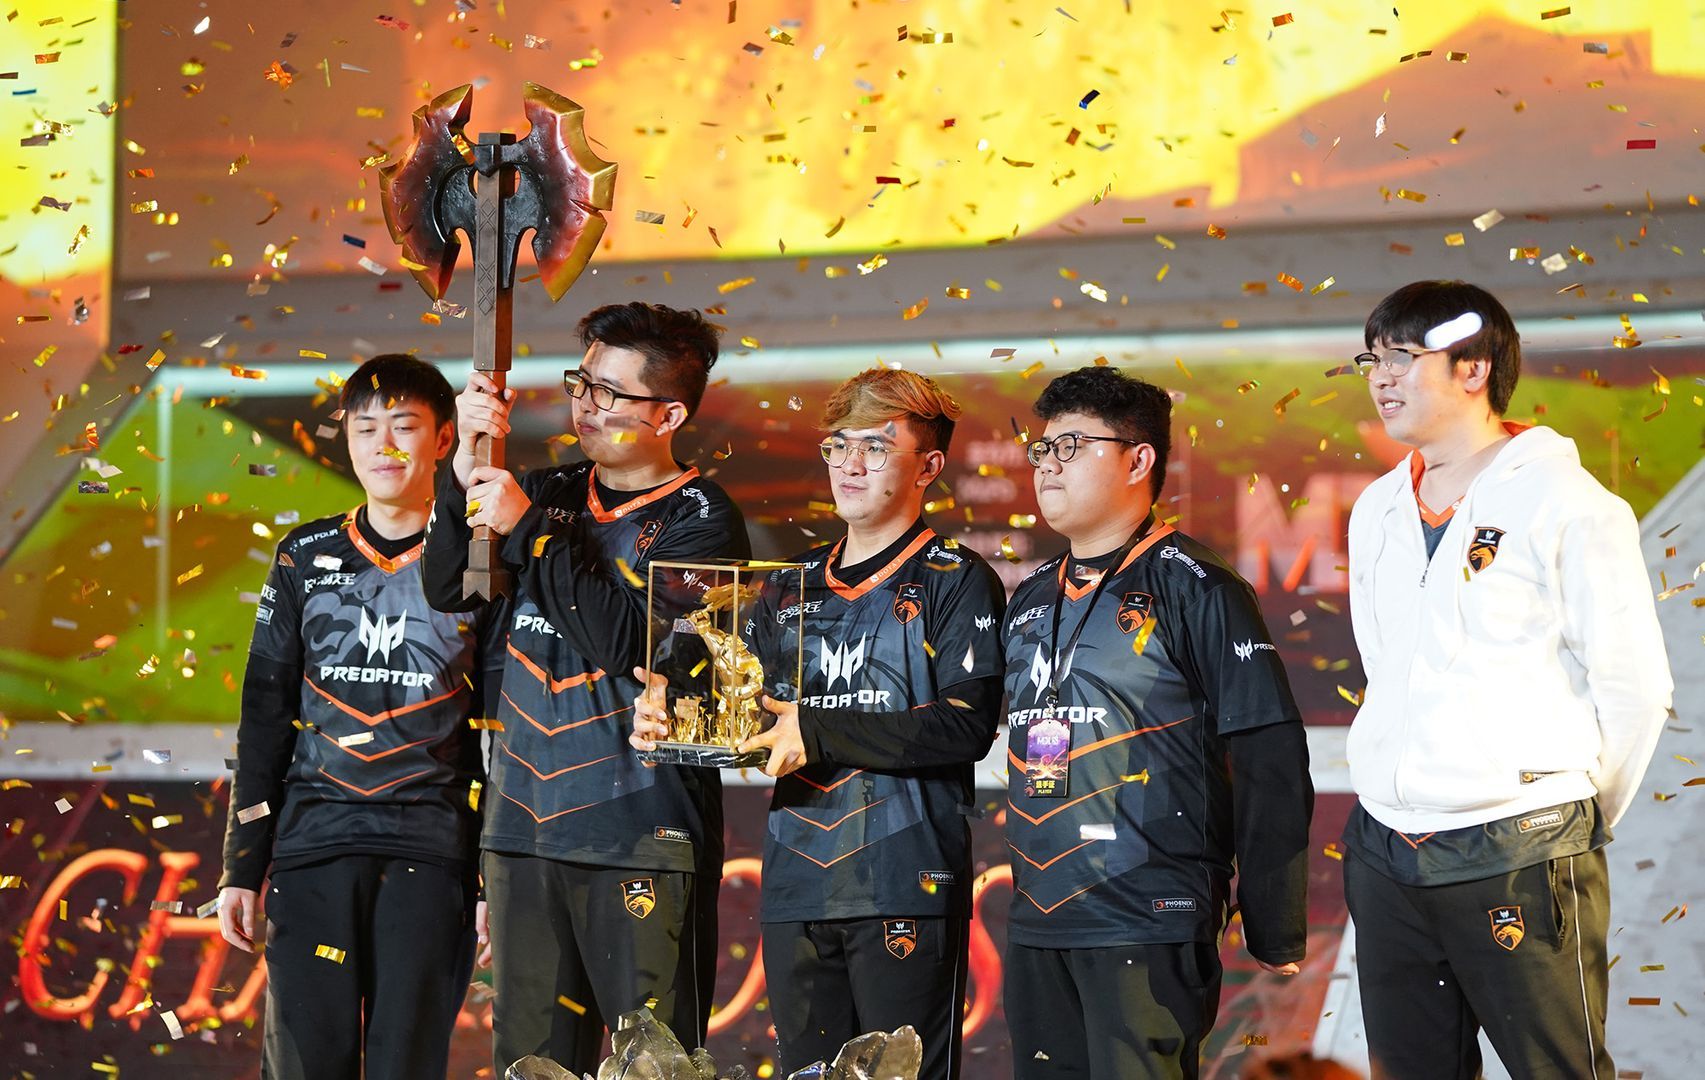 A New Favorite to Win The International 2018 Emerges at the MDL Changsha Dota  2 Major - Inven Global